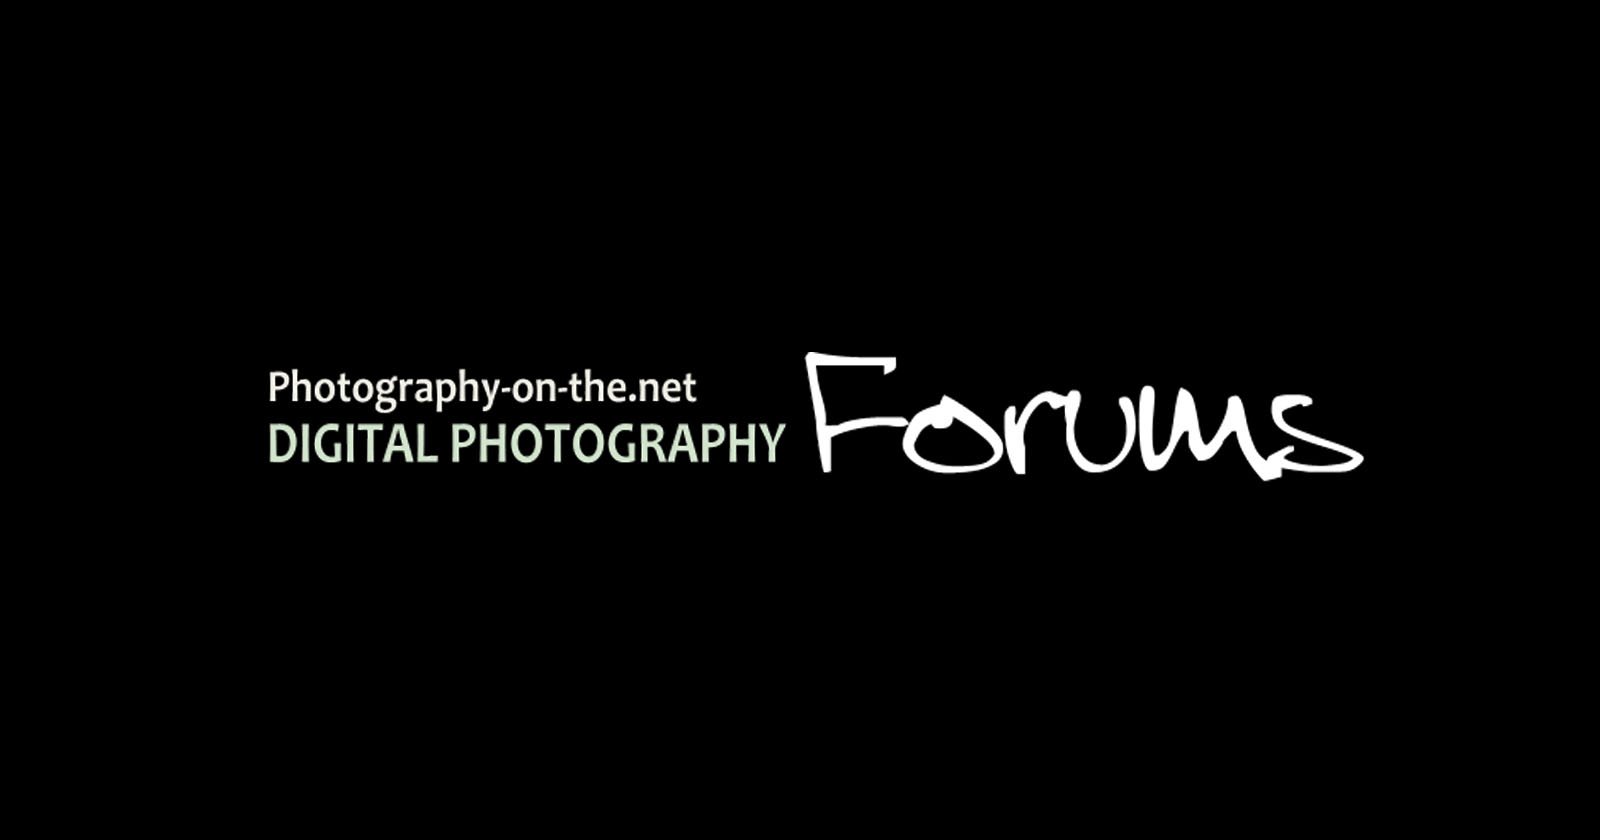 The Photography-on-the-Net Forums is Shutting Down